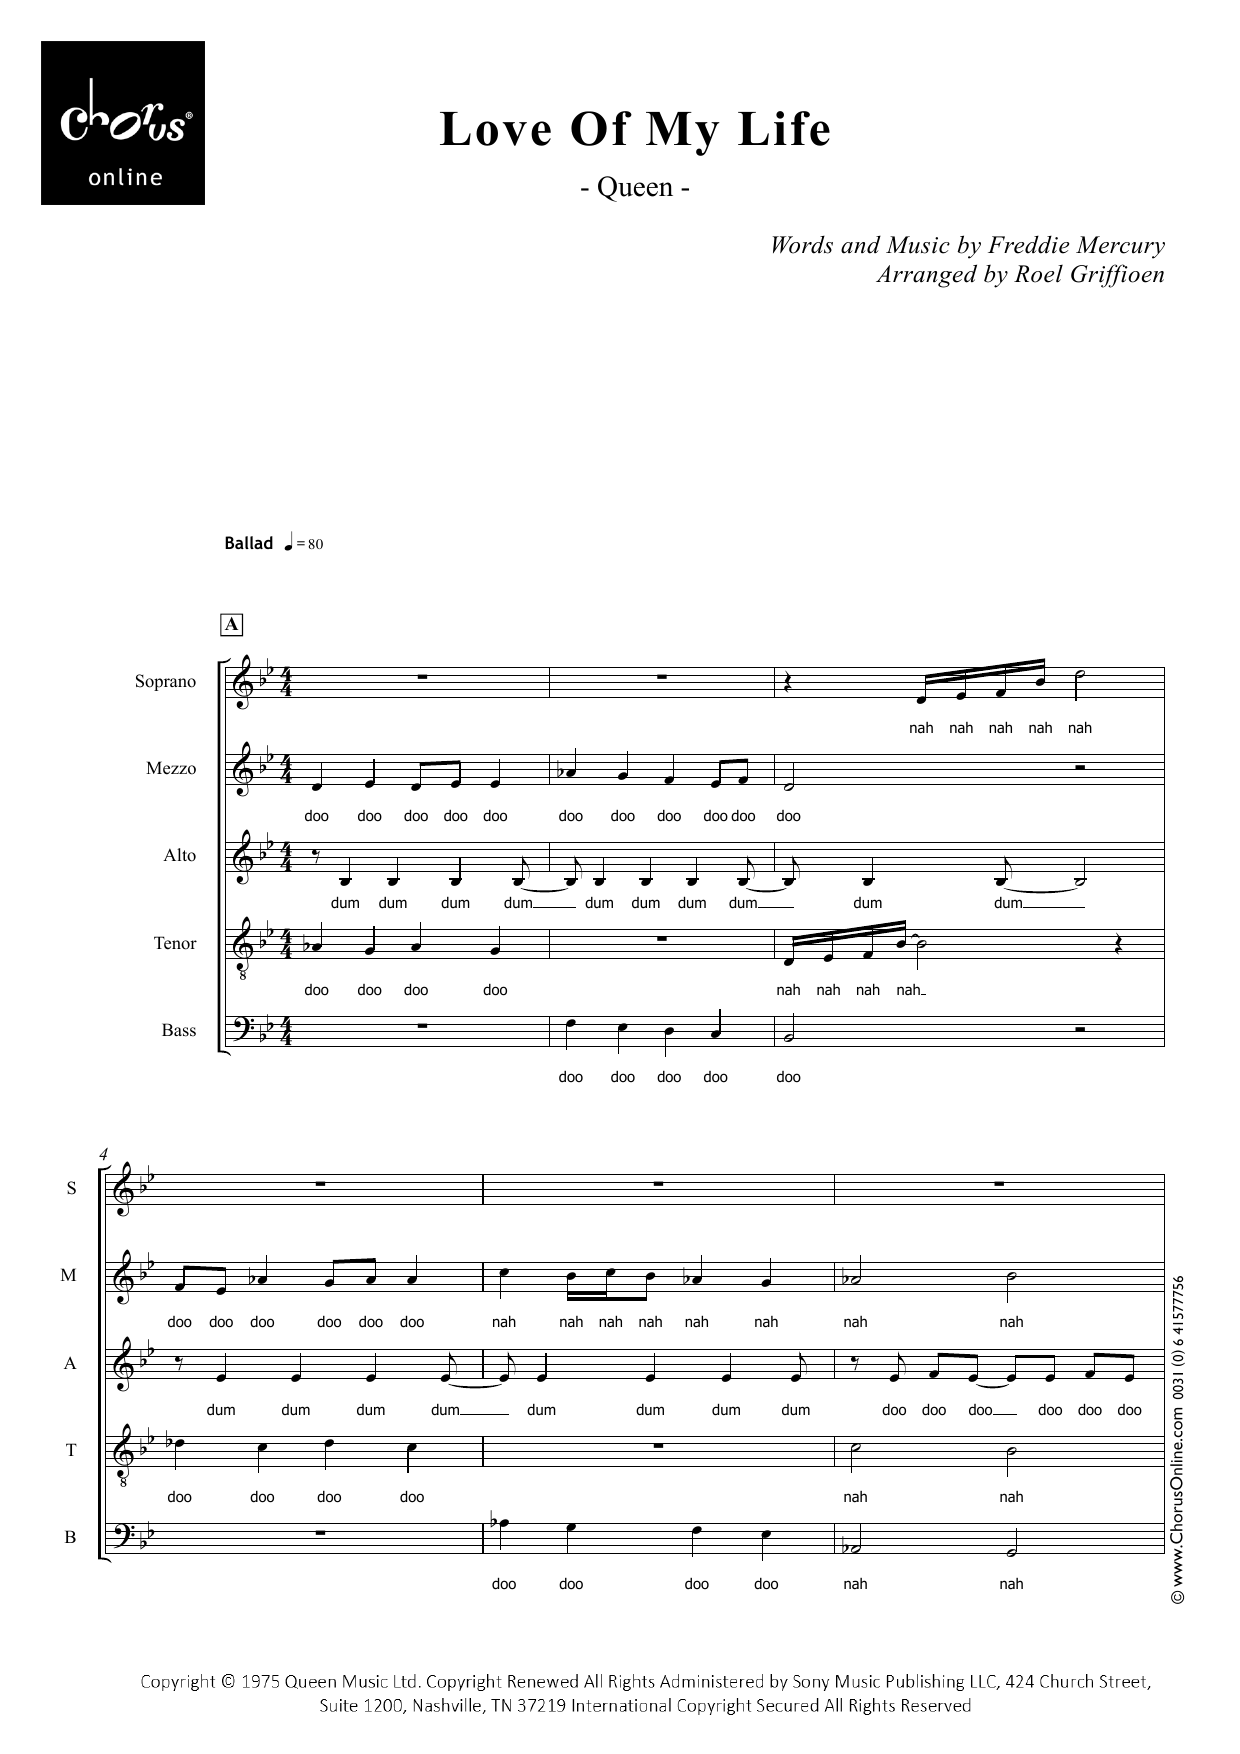 Queen Love of My Life (arr. Roel Griffioen) sheet music notes printable PDF score